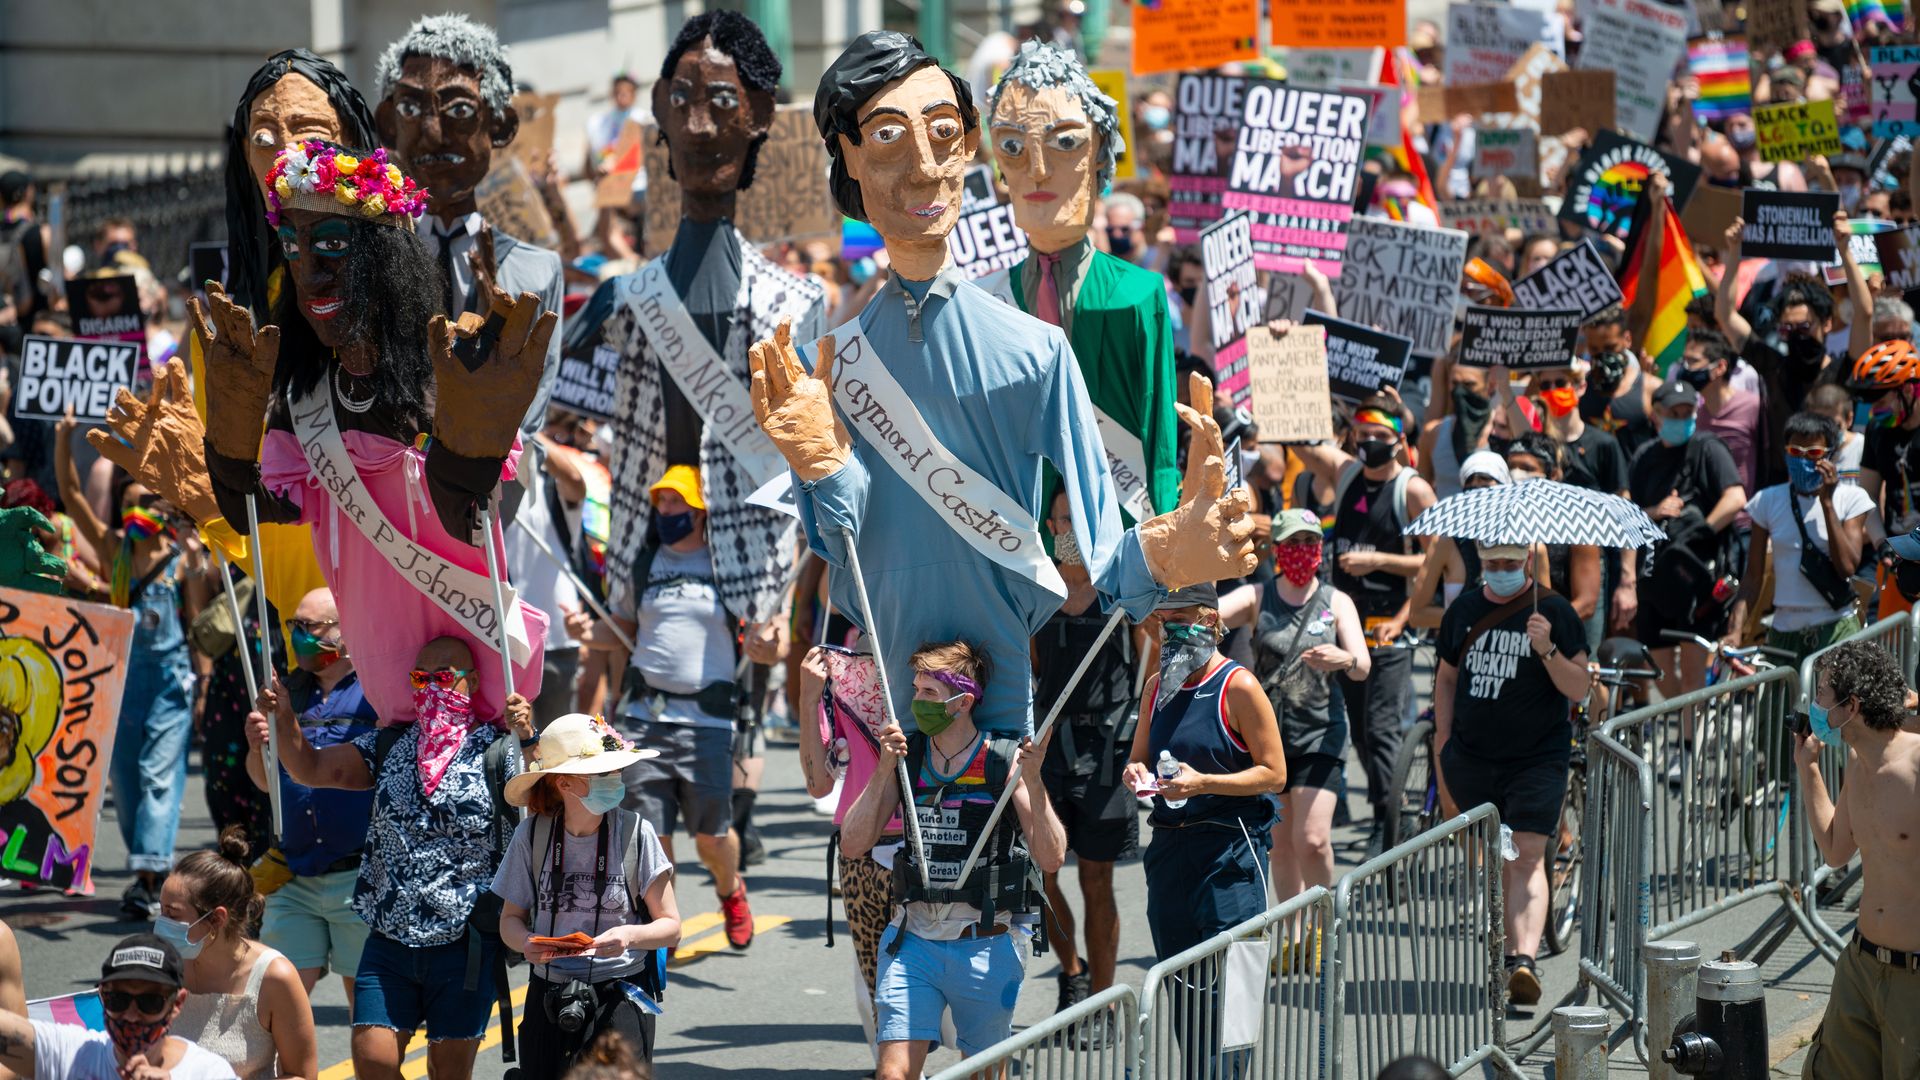 Artist Chris Williams' Pride Puppets march during the Queer Liberation March for Black Lives & Against Police Brutality on June 28, 2020 in New York City.